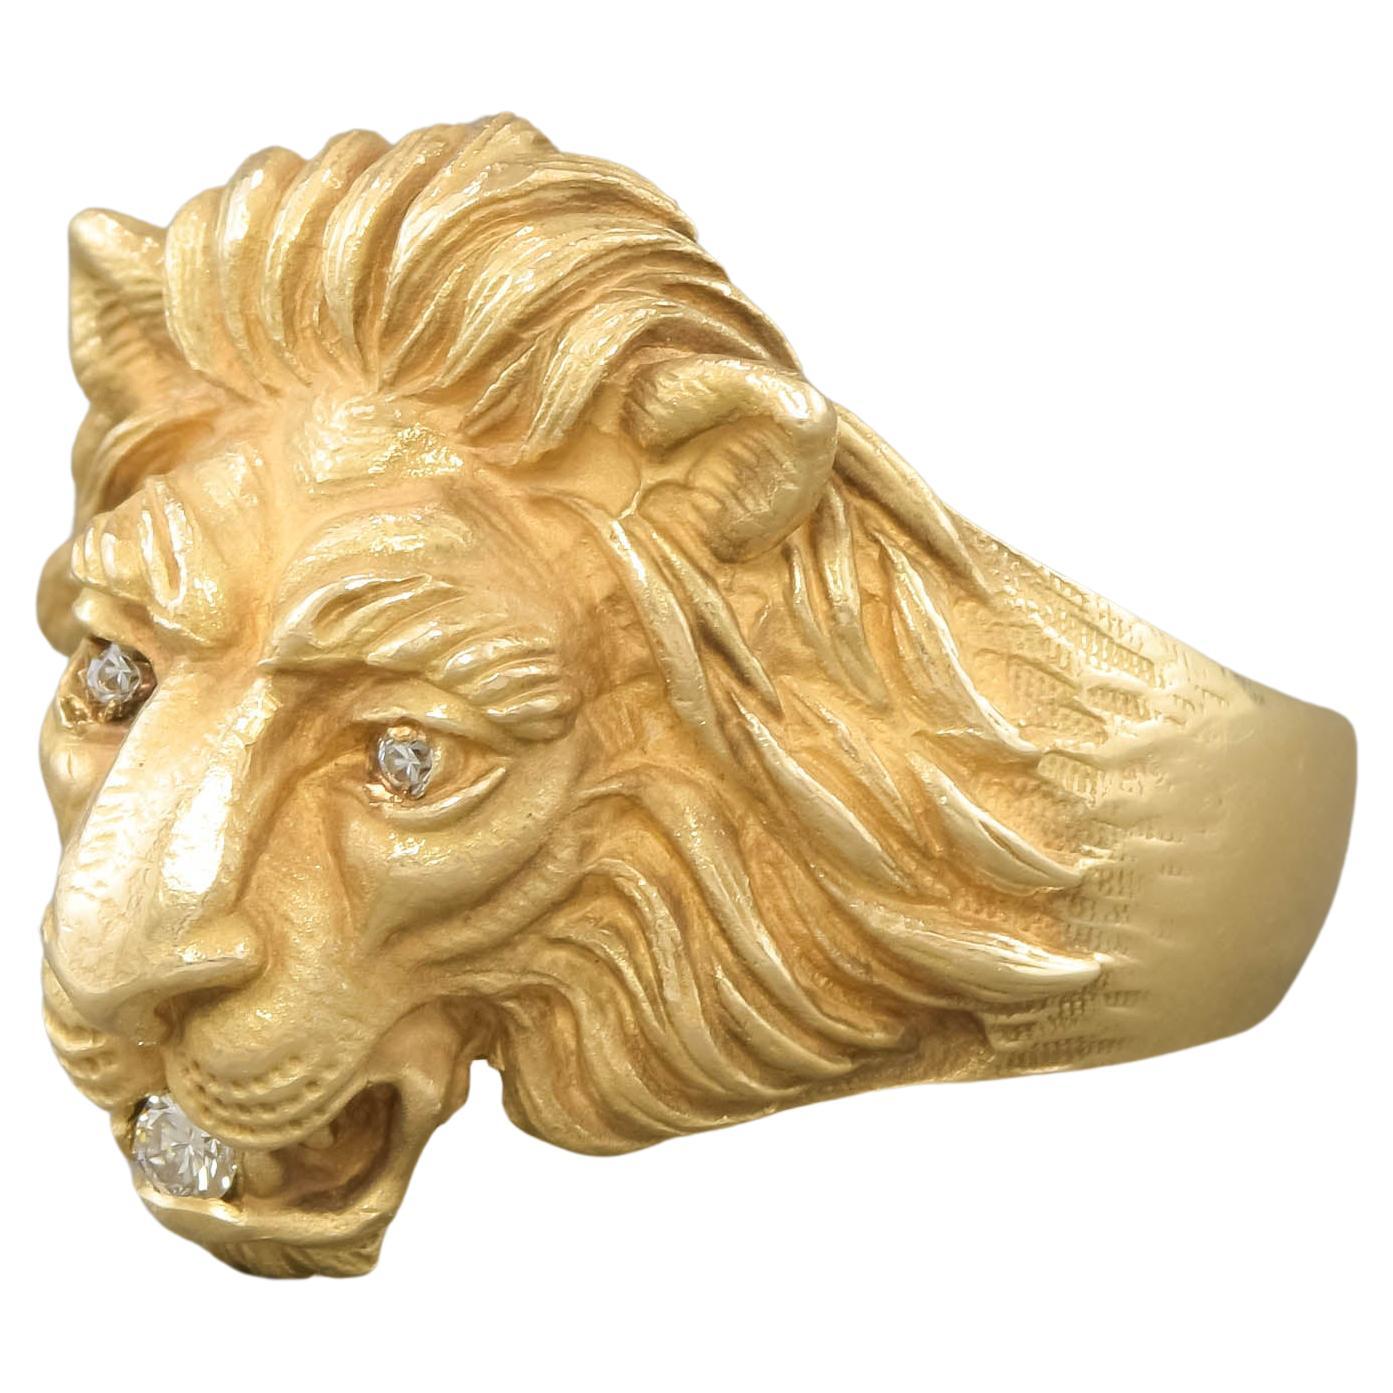 Lion ring gold jewelry printable 3D model 3D model 3D printable | CGTrader